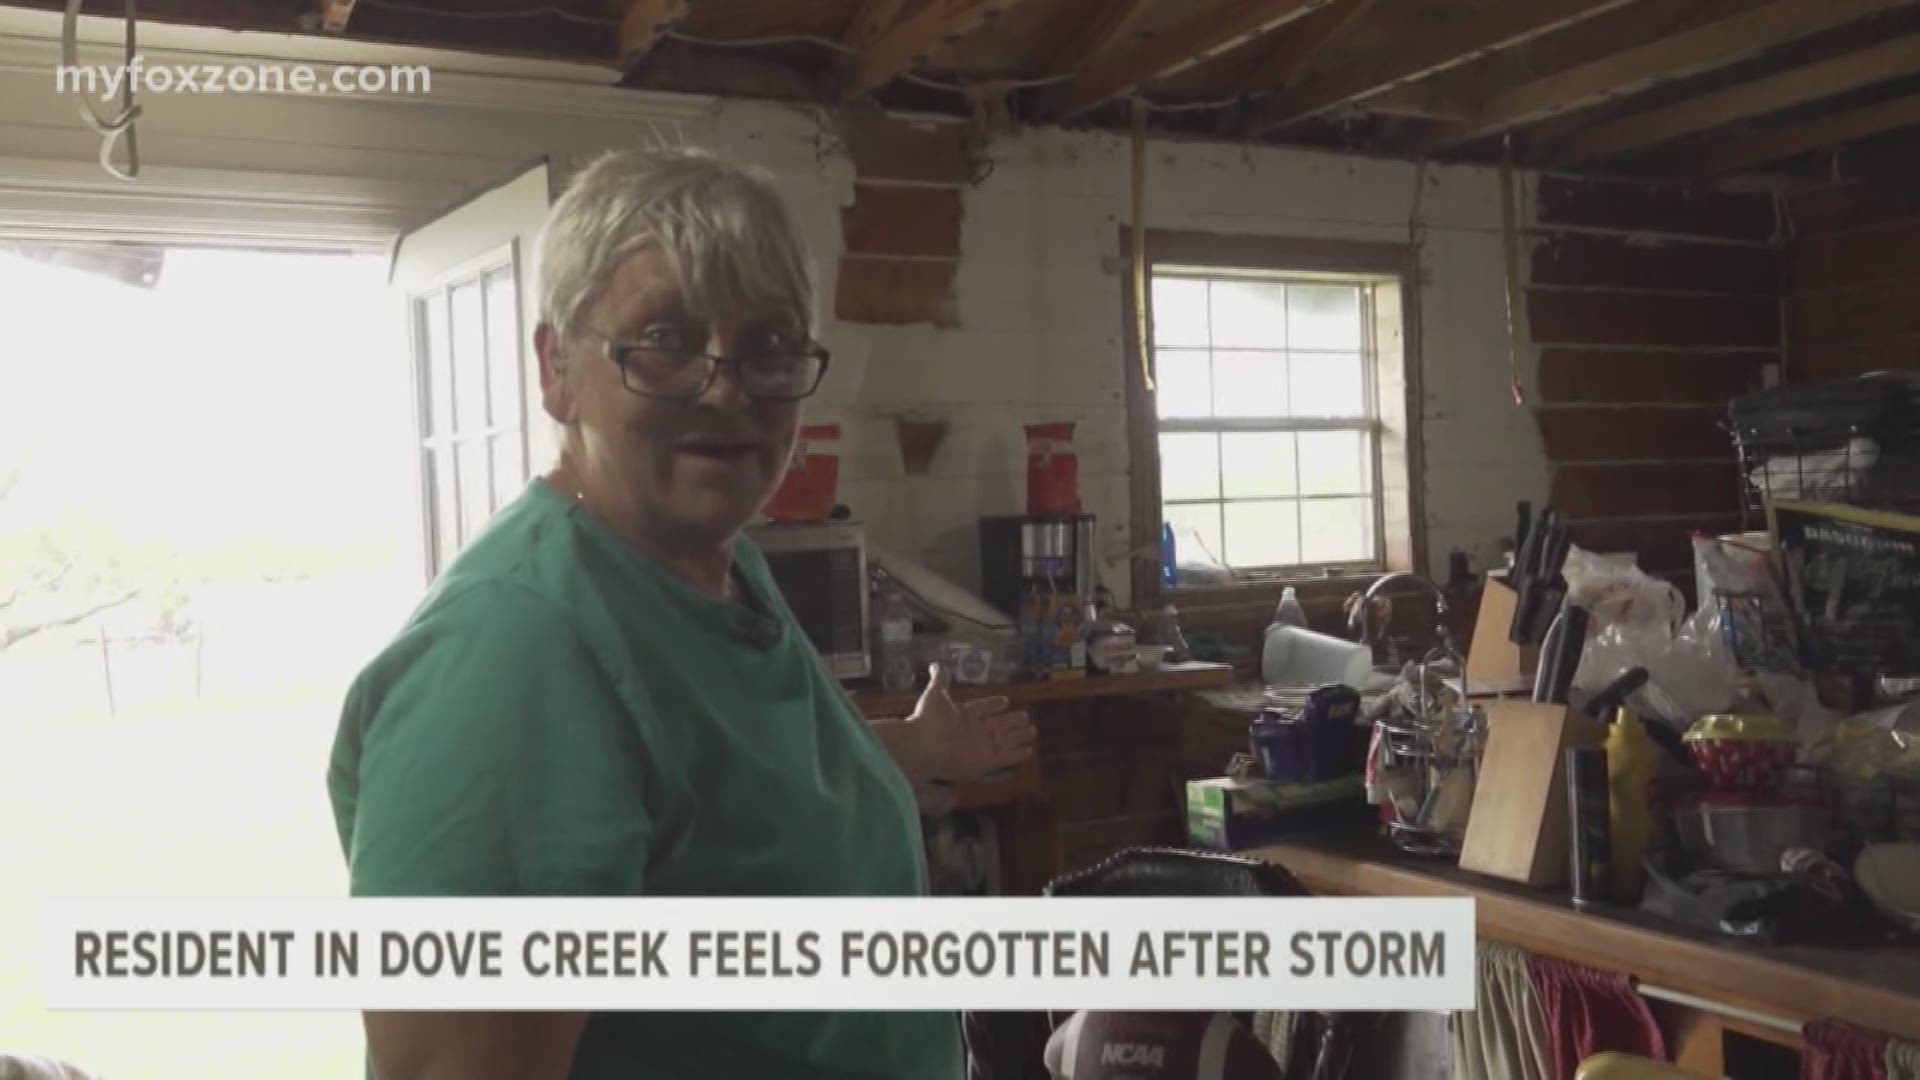 Dove creek was hit by a tornado that the national weather service confirms that the EF-2 storm.